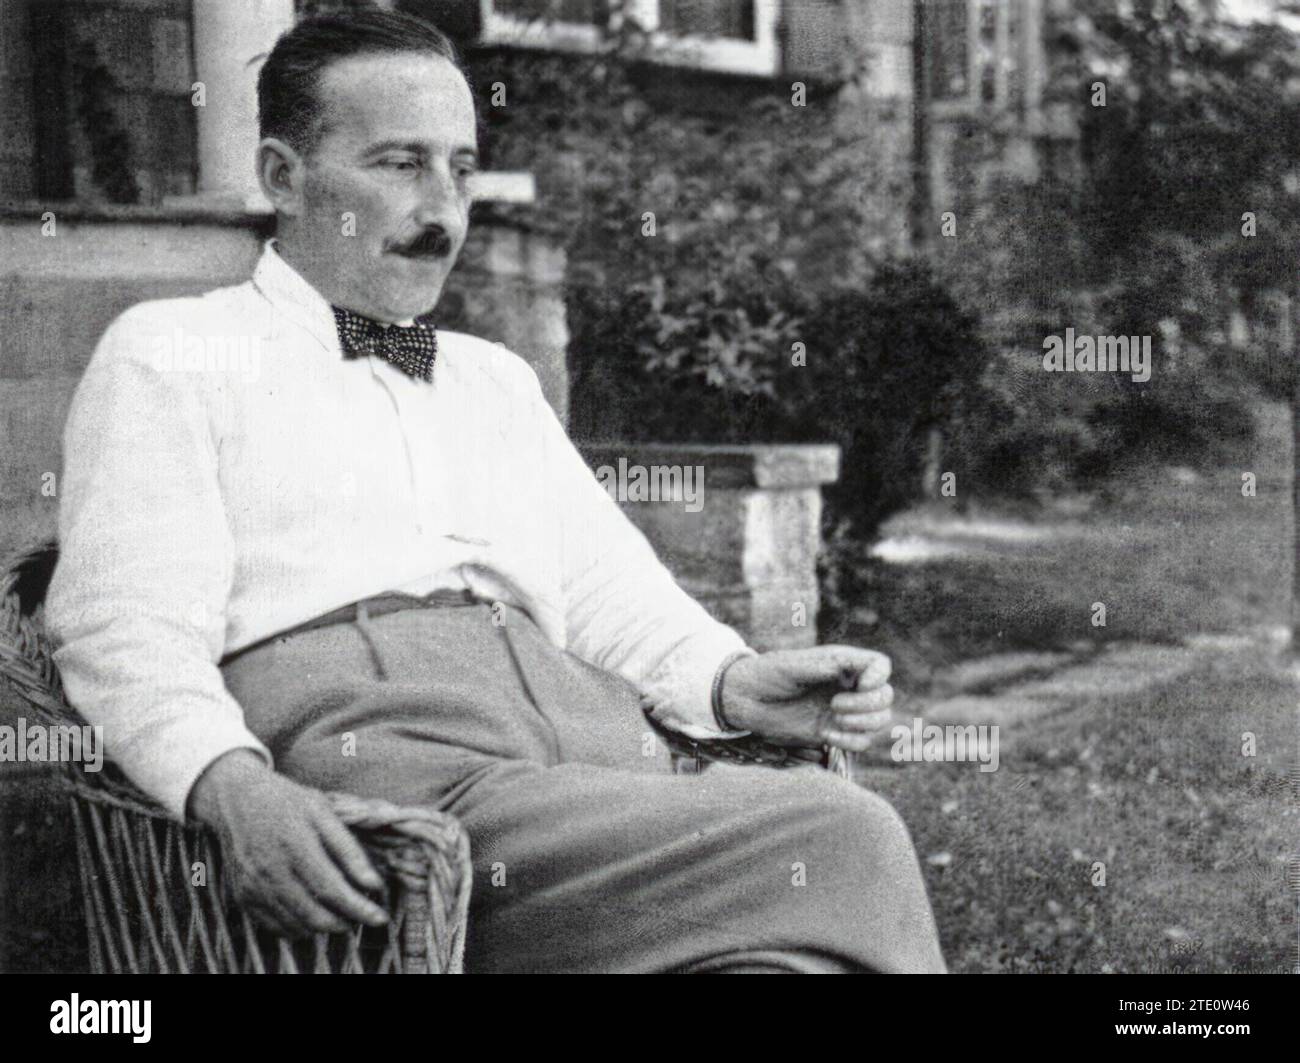 12/31/1929. Austrian writer Stefan Zweig relaxes sitting in the entrance of his house. Credit: Album / Archivo ABC Stock Photo